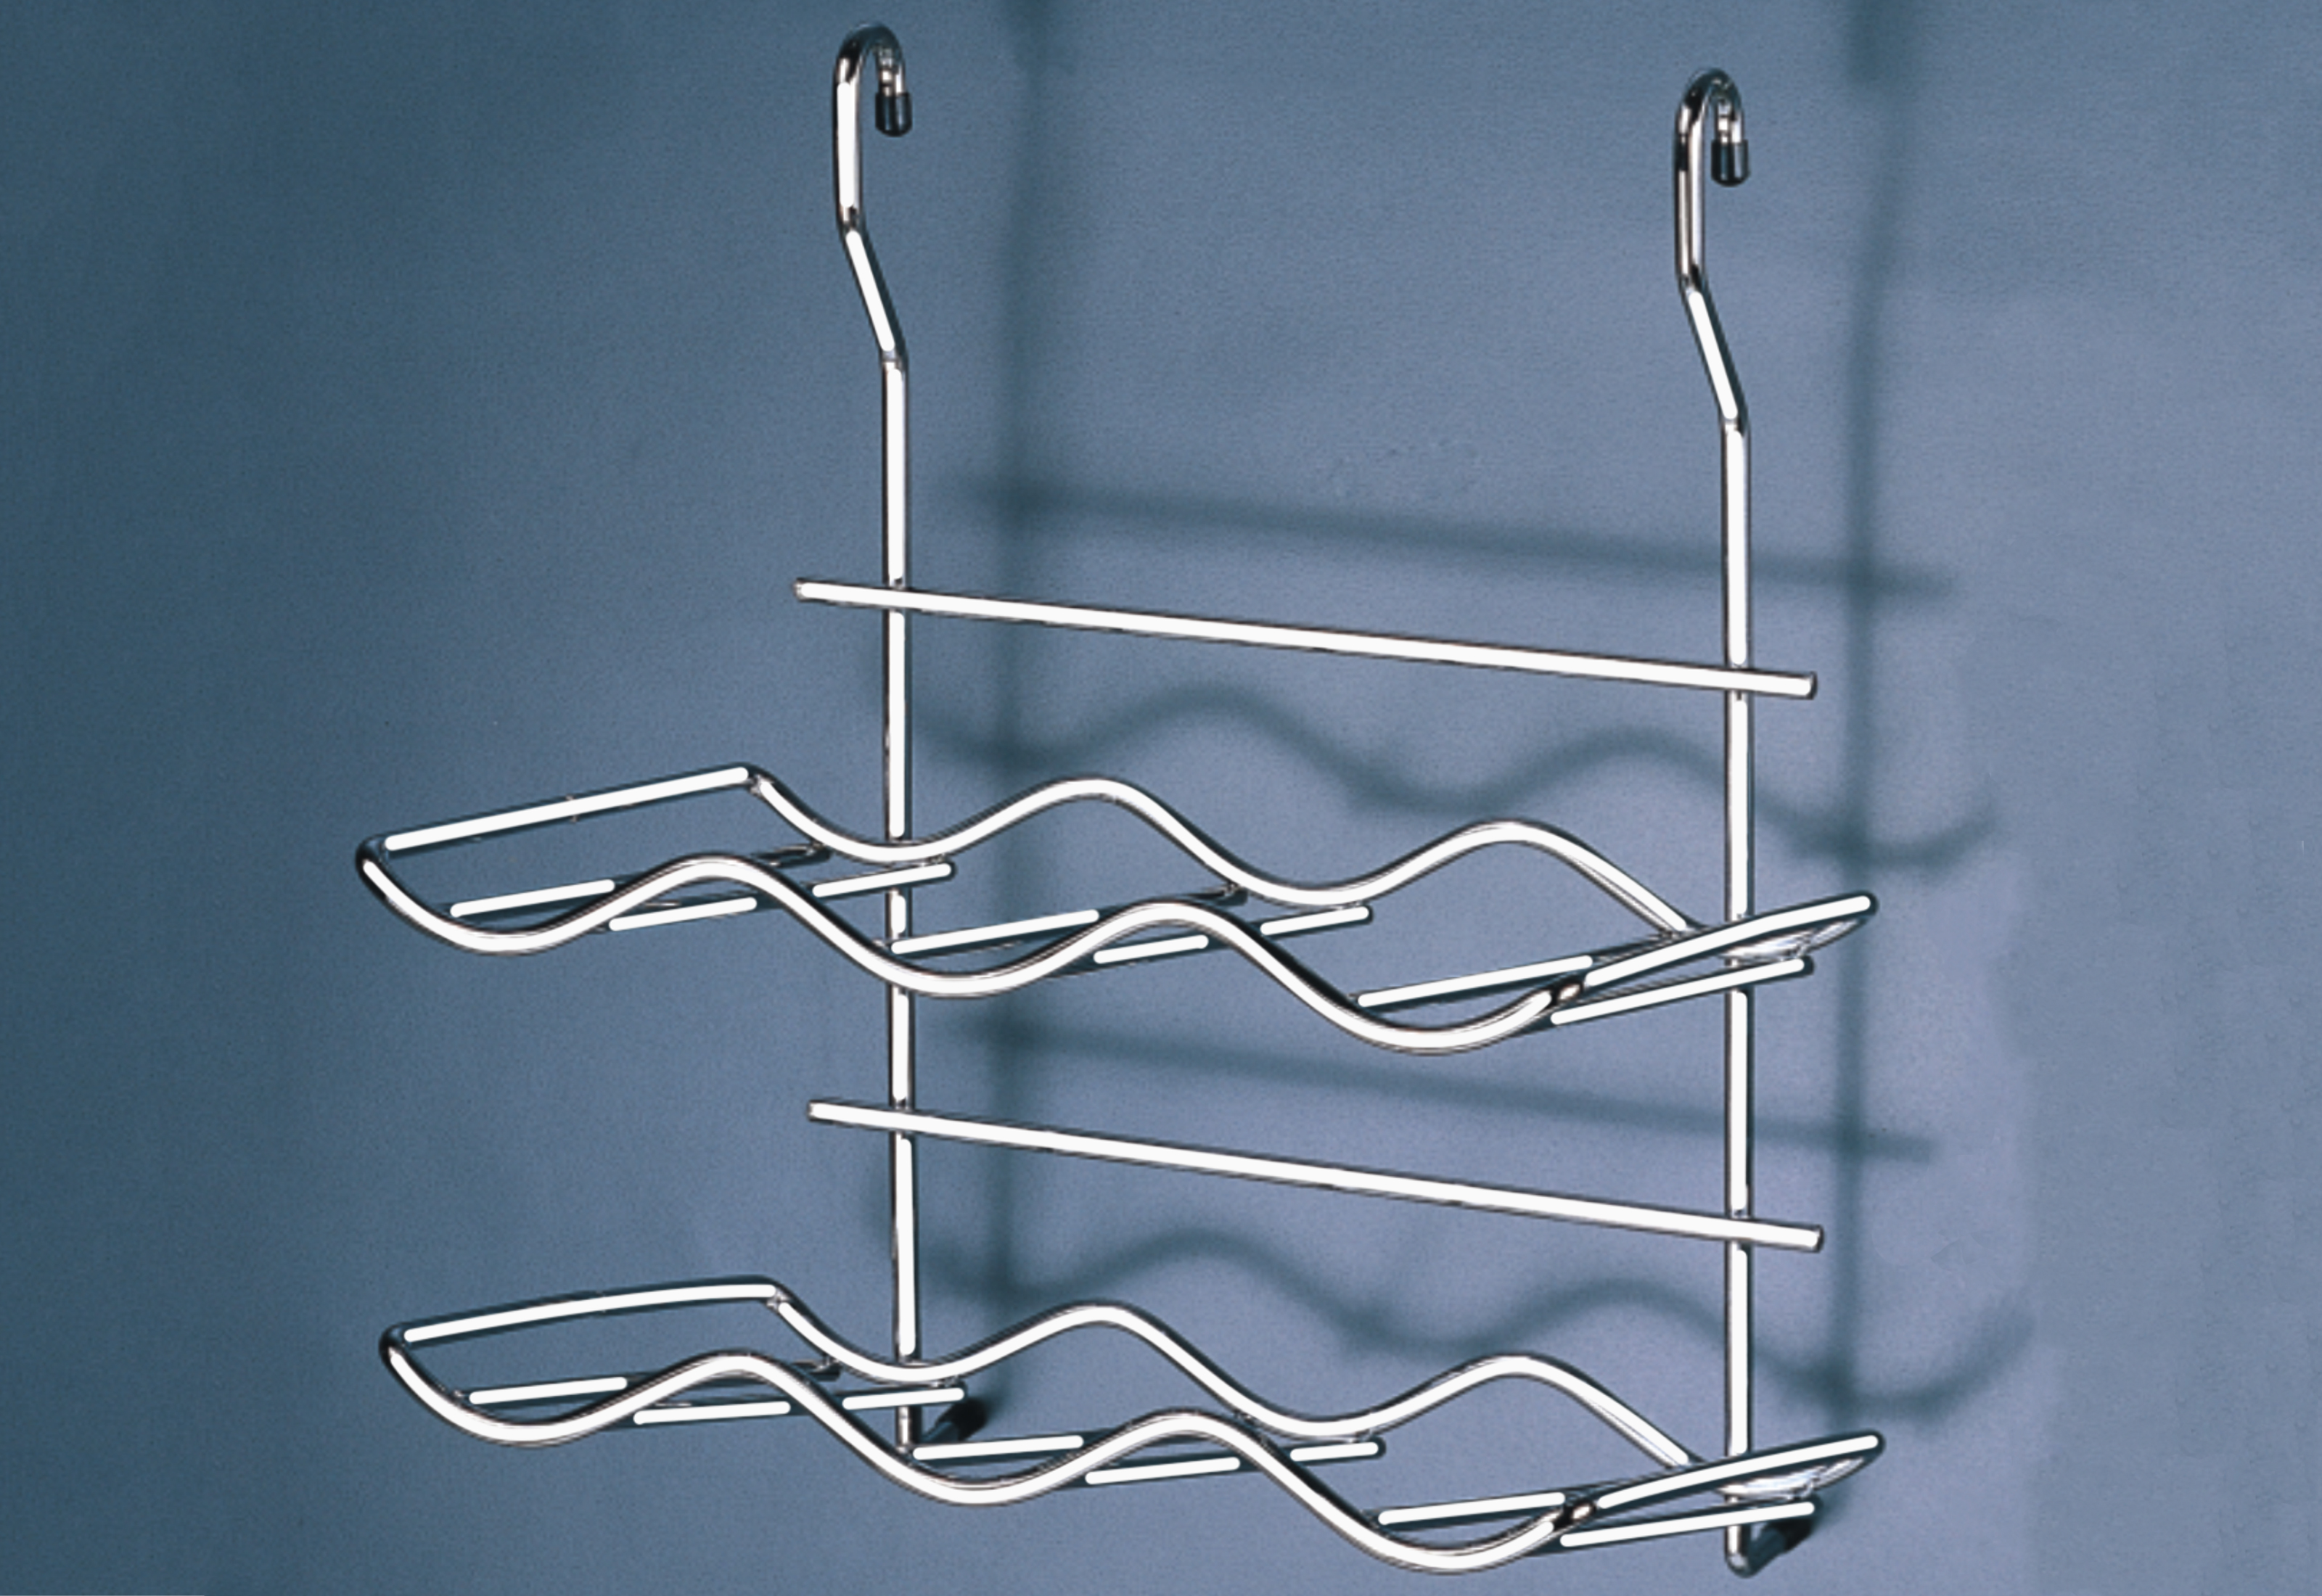 WELL MAX provide hanging wine holder CWJ131 | Bar System